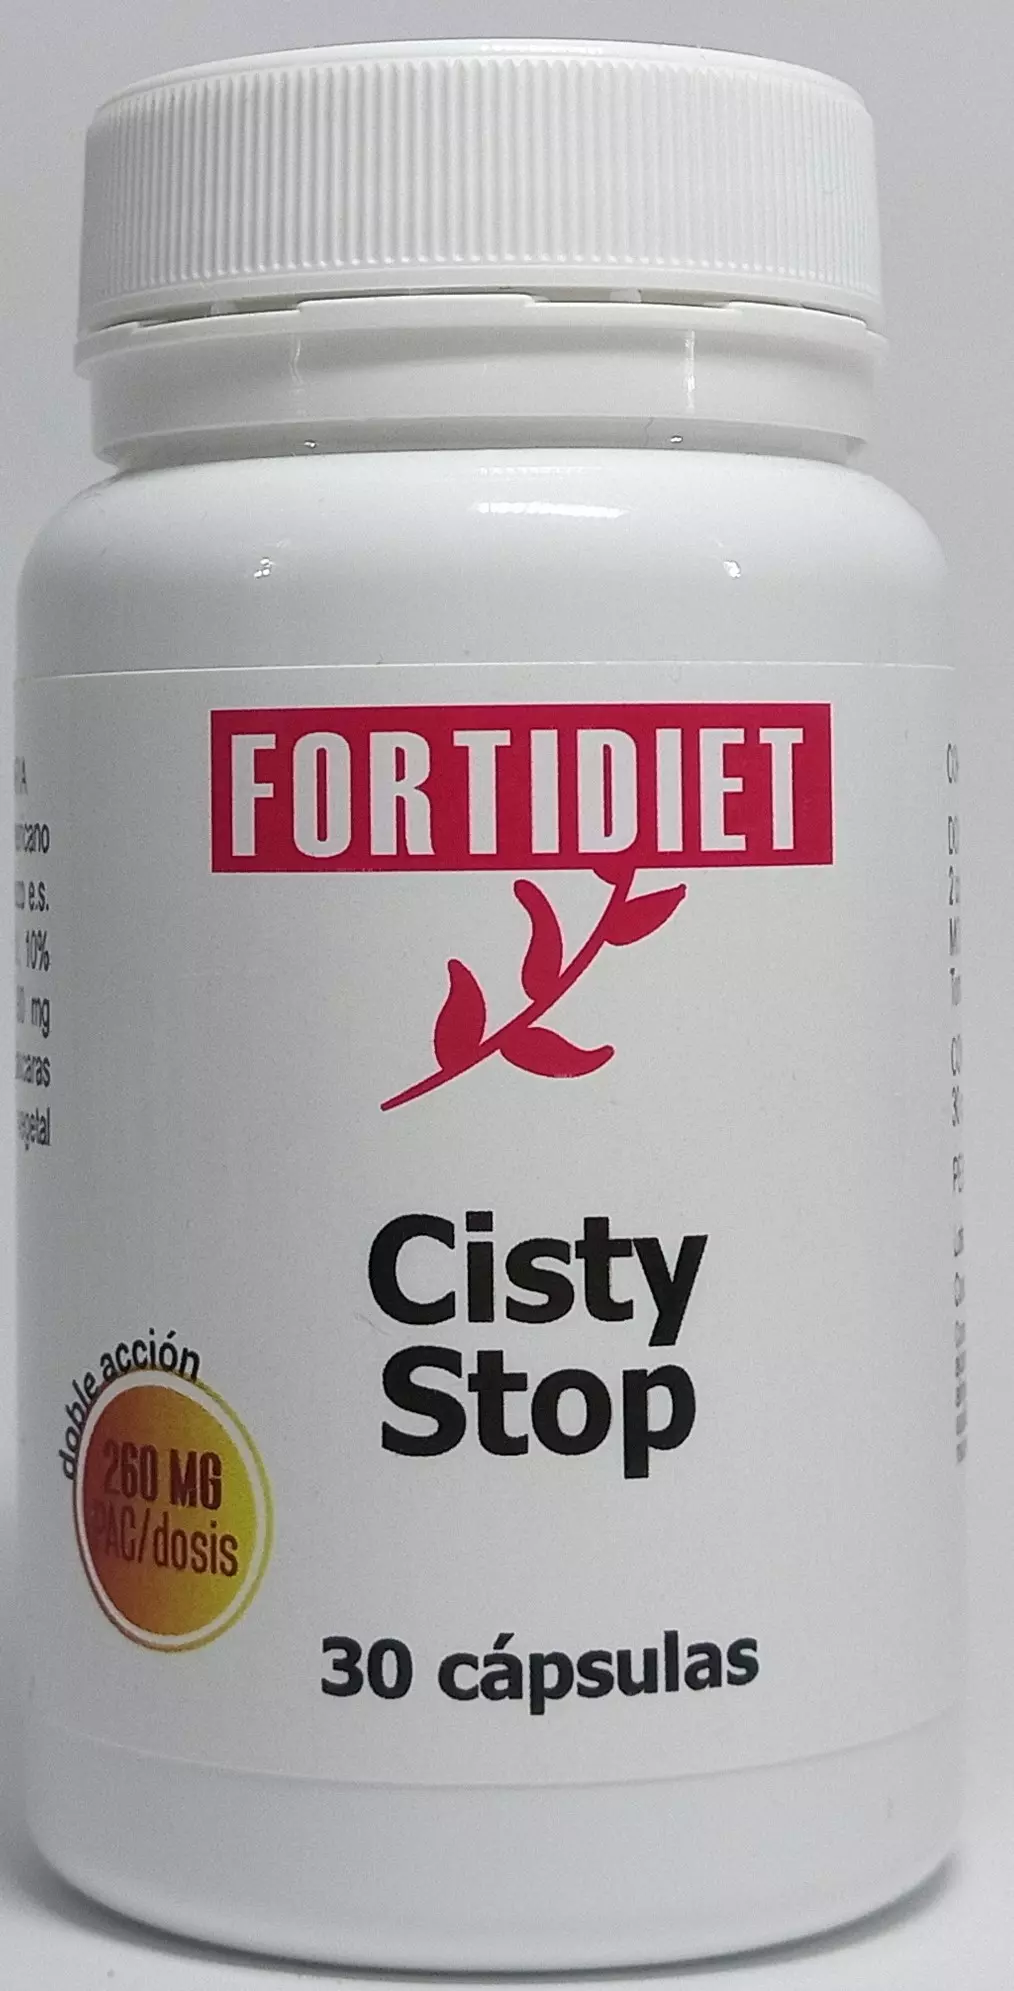 Fortidiet Cisty stop 30 caps.